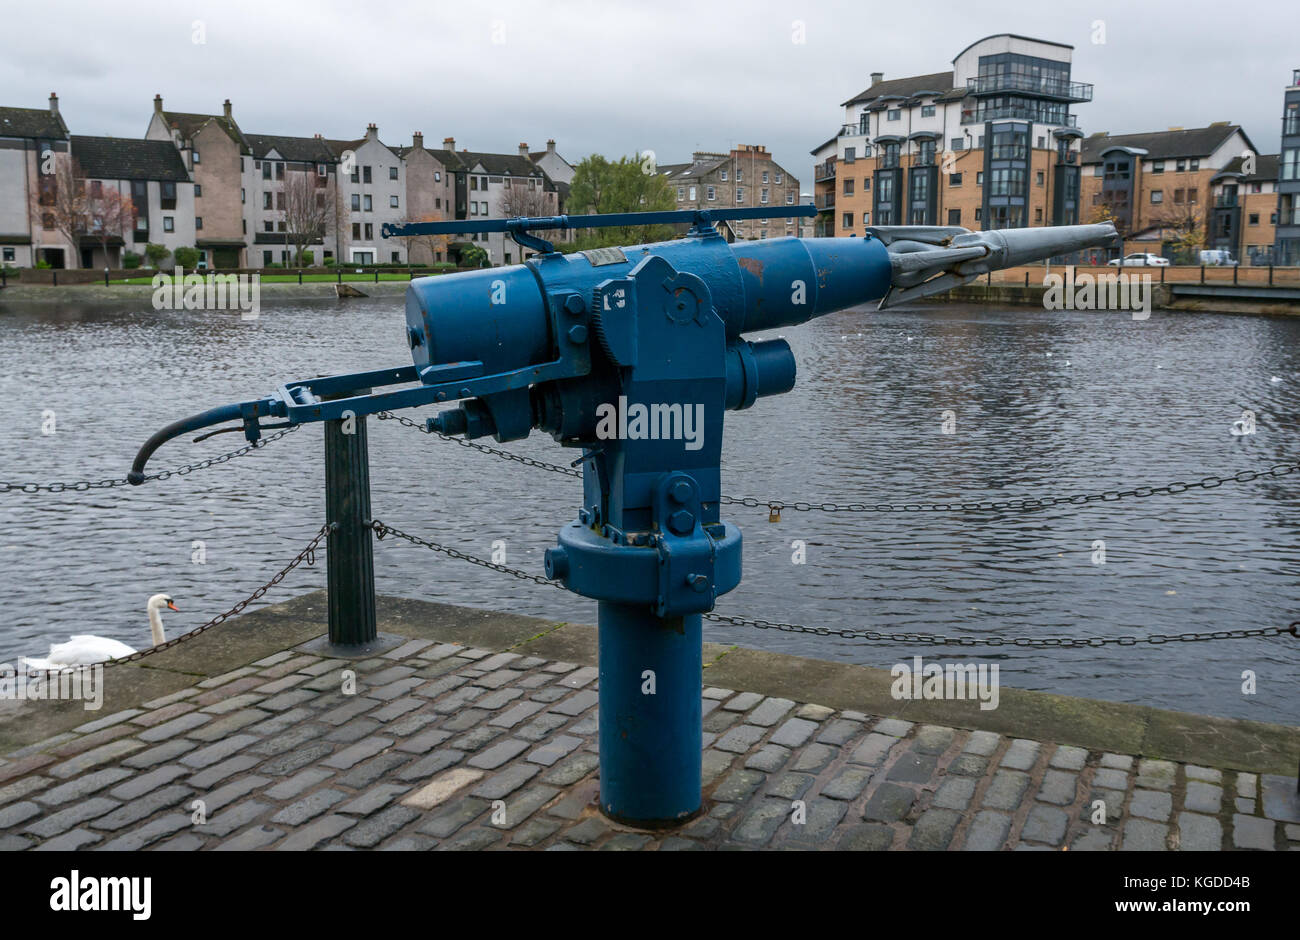 A relic of Leith's maritime history. Harpoon gun used by Scottish whaling ships, The Shore, Water of Leith, Leith, Edinburgh, Scotland, UK Stock Photo